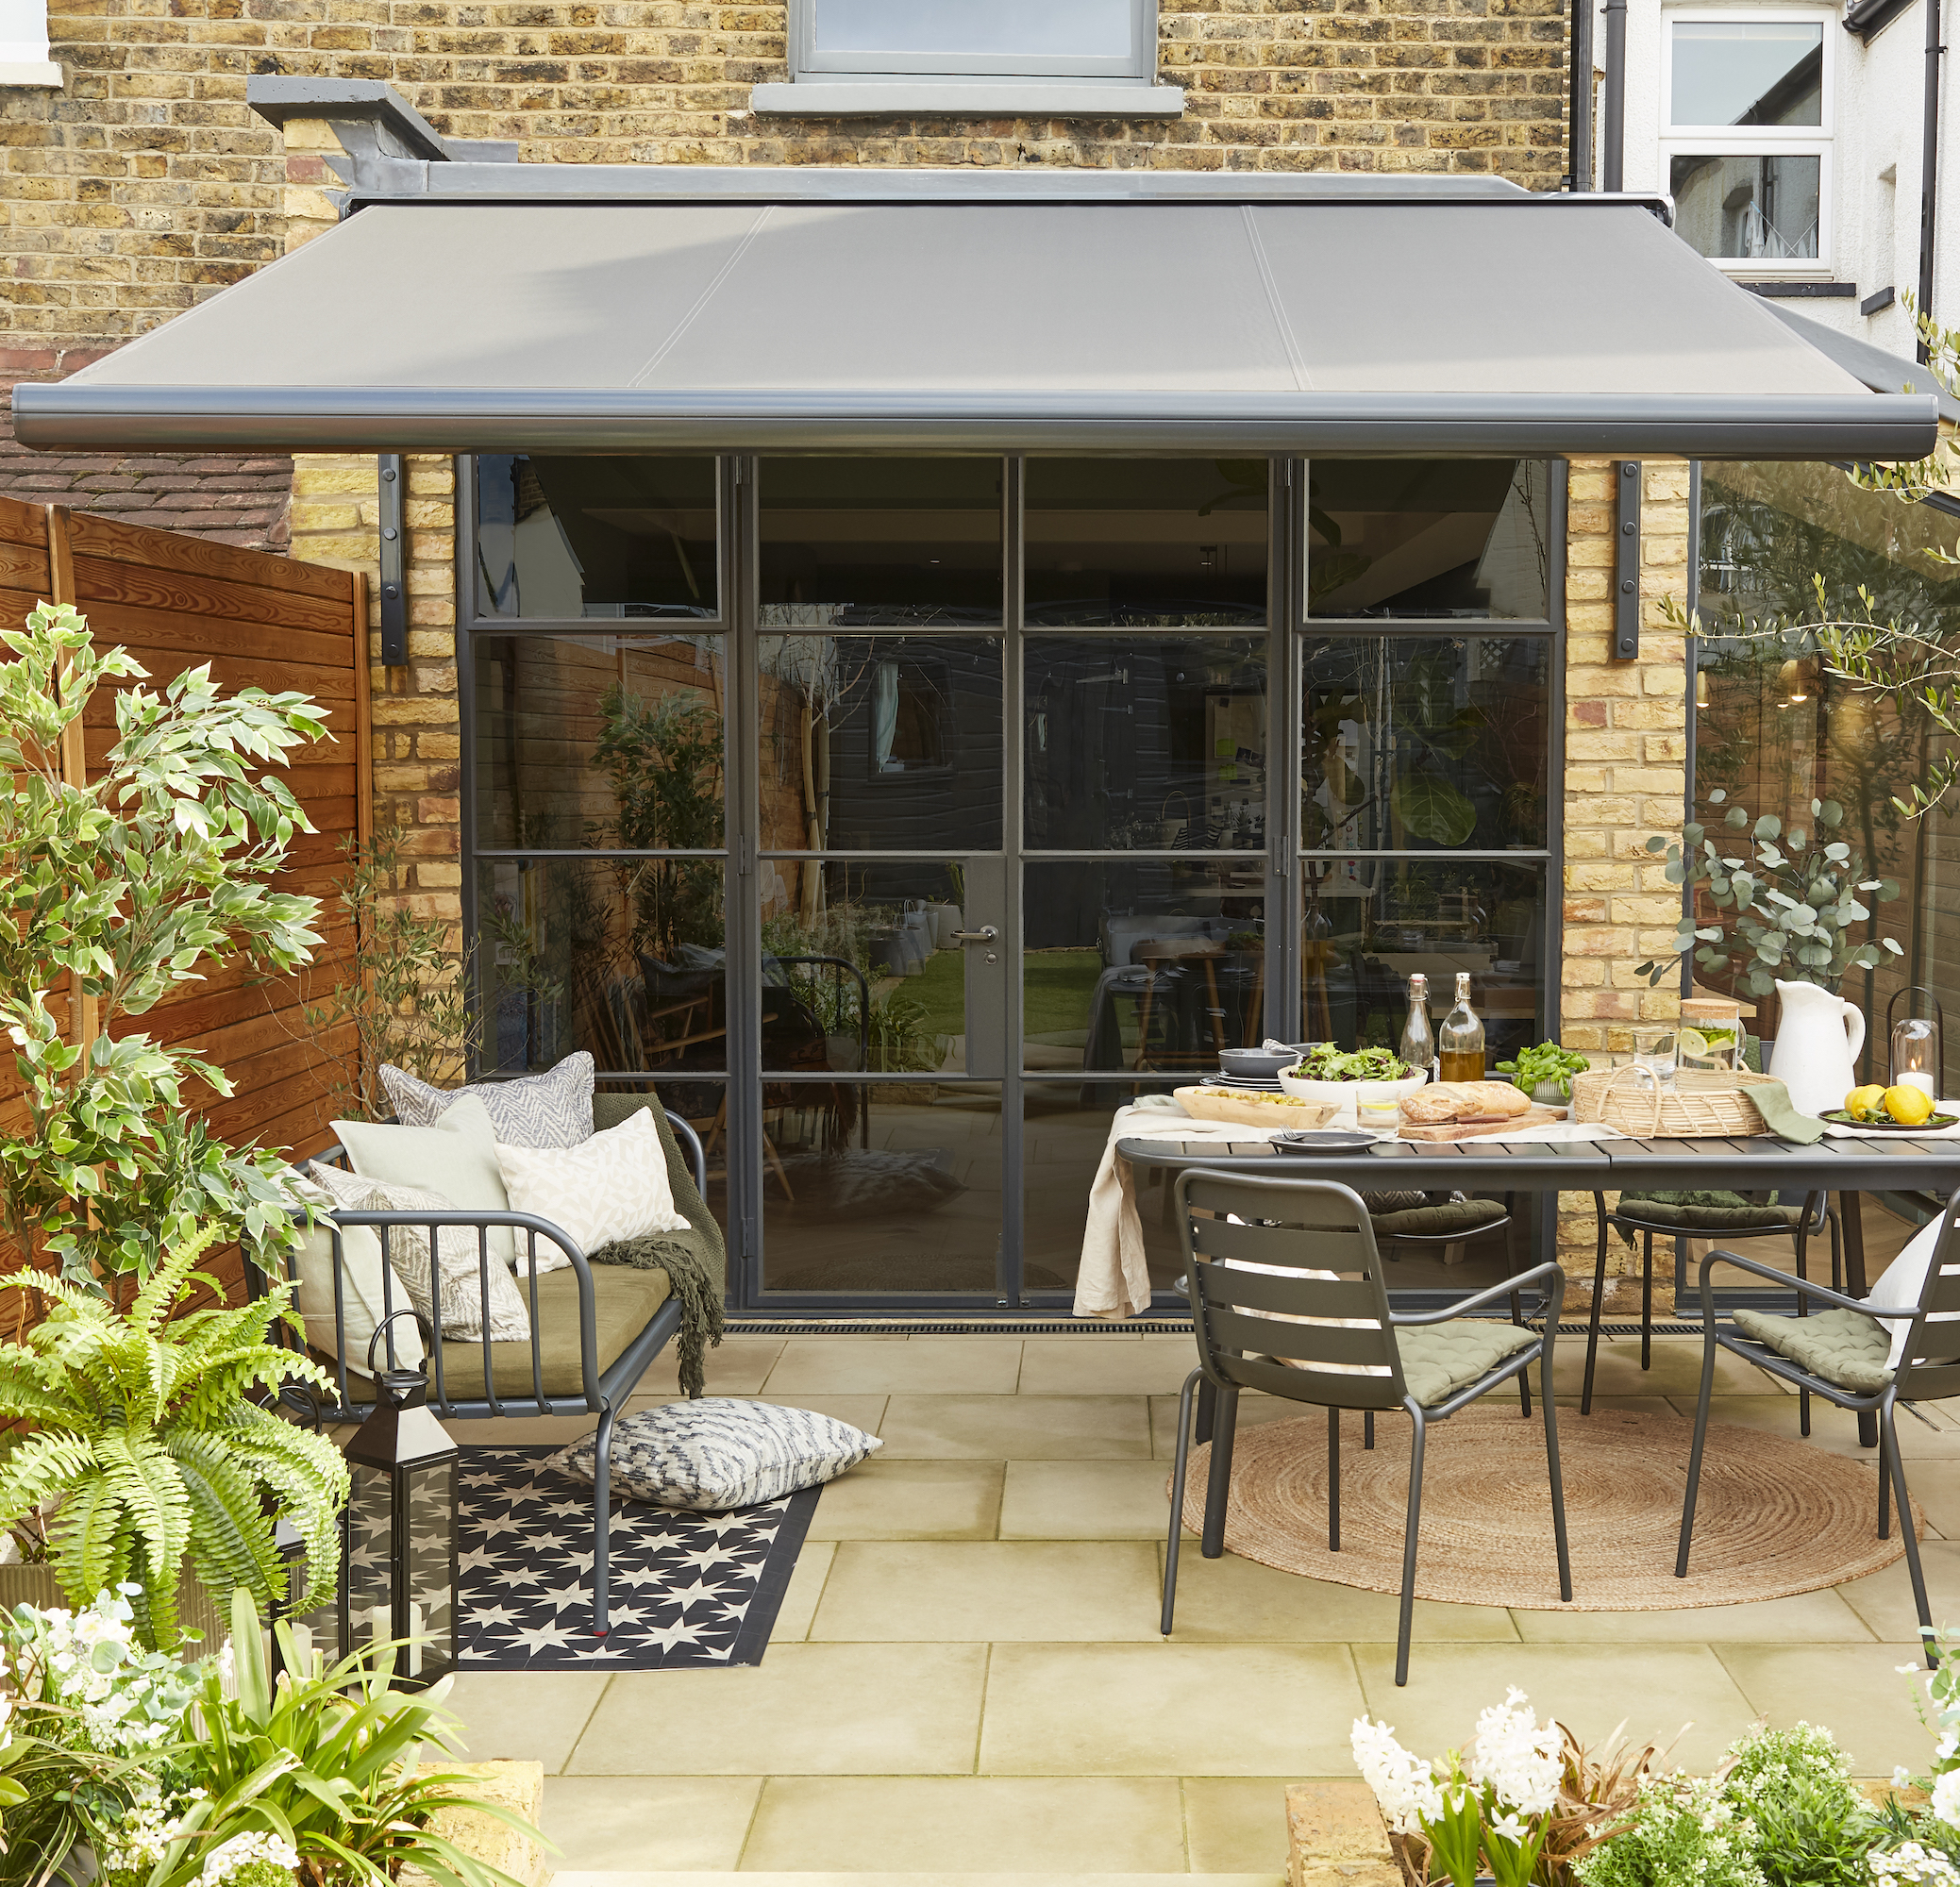 Awning above garden patio area with table, chairs and bench